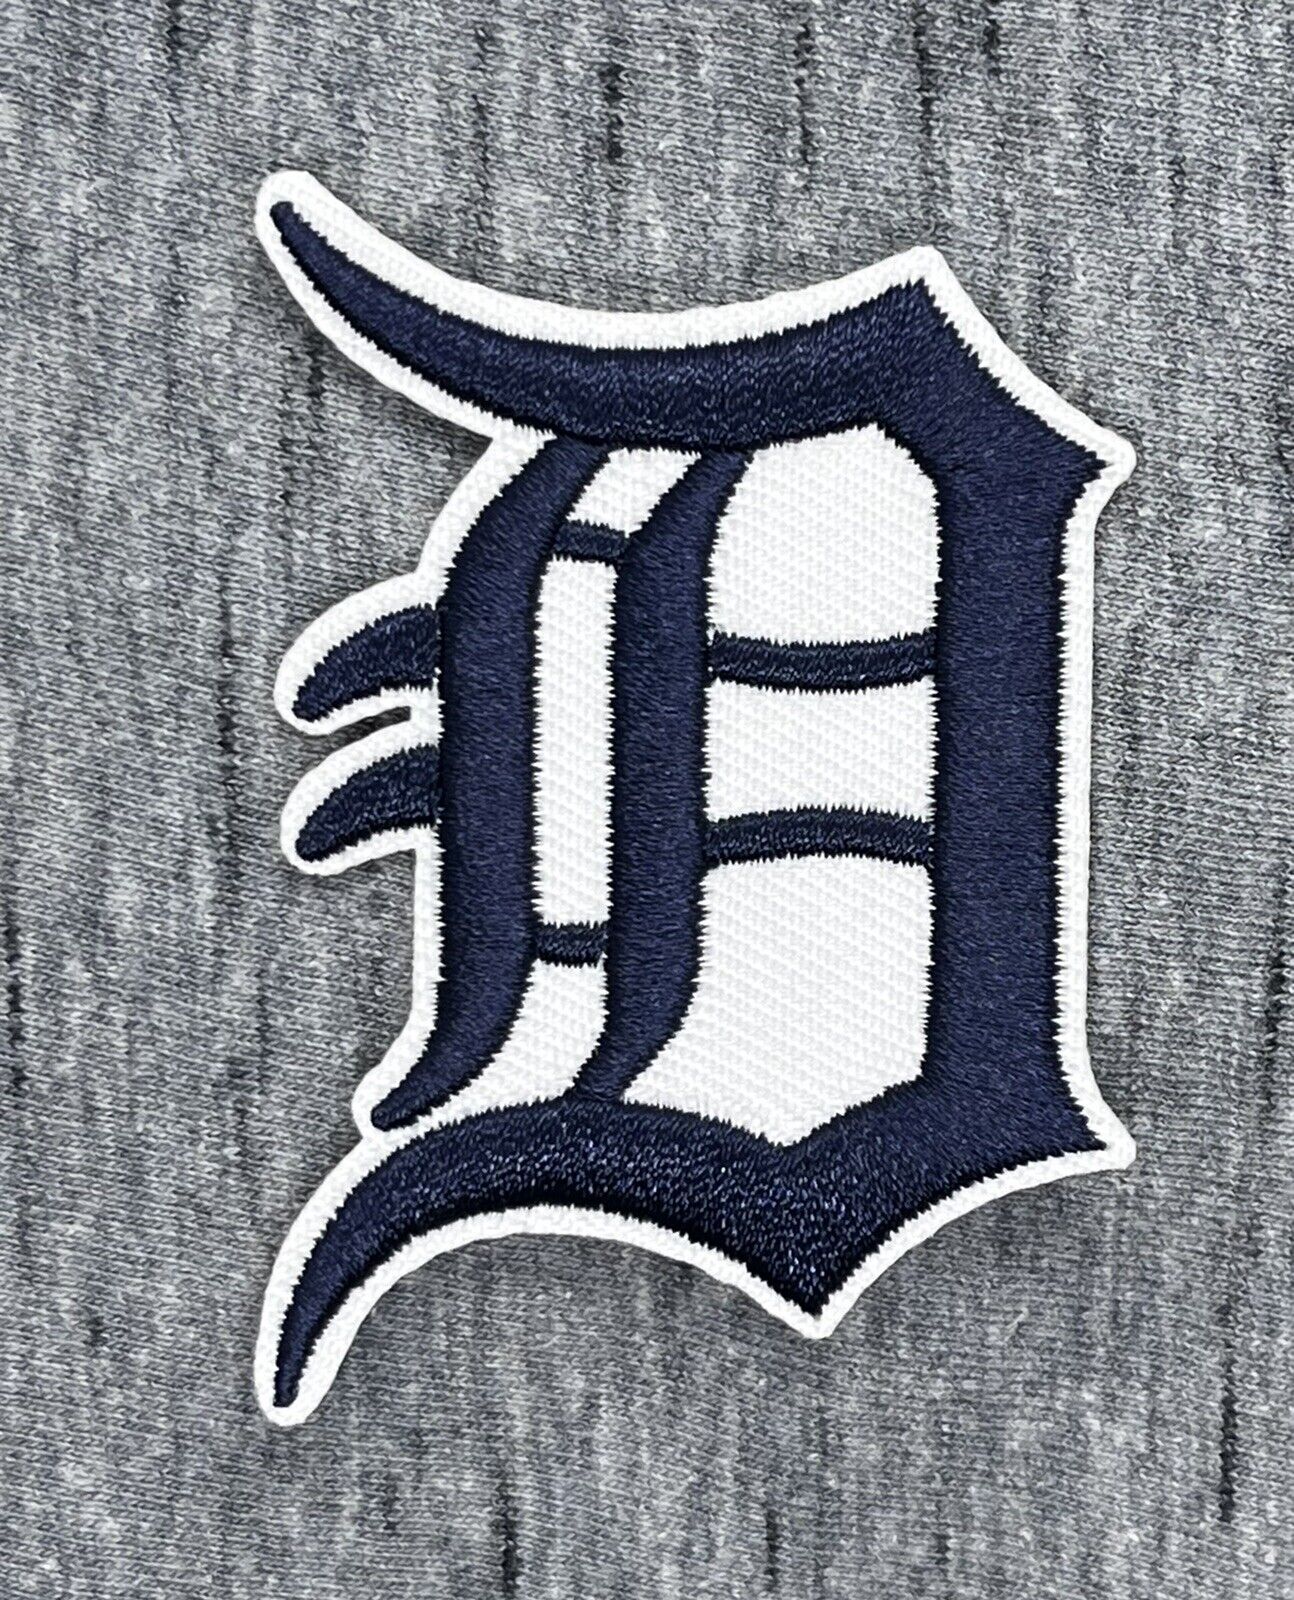 DETROIT TIGERS EMBROIDERED IRON ON PATCH 2.75” X 1.75 